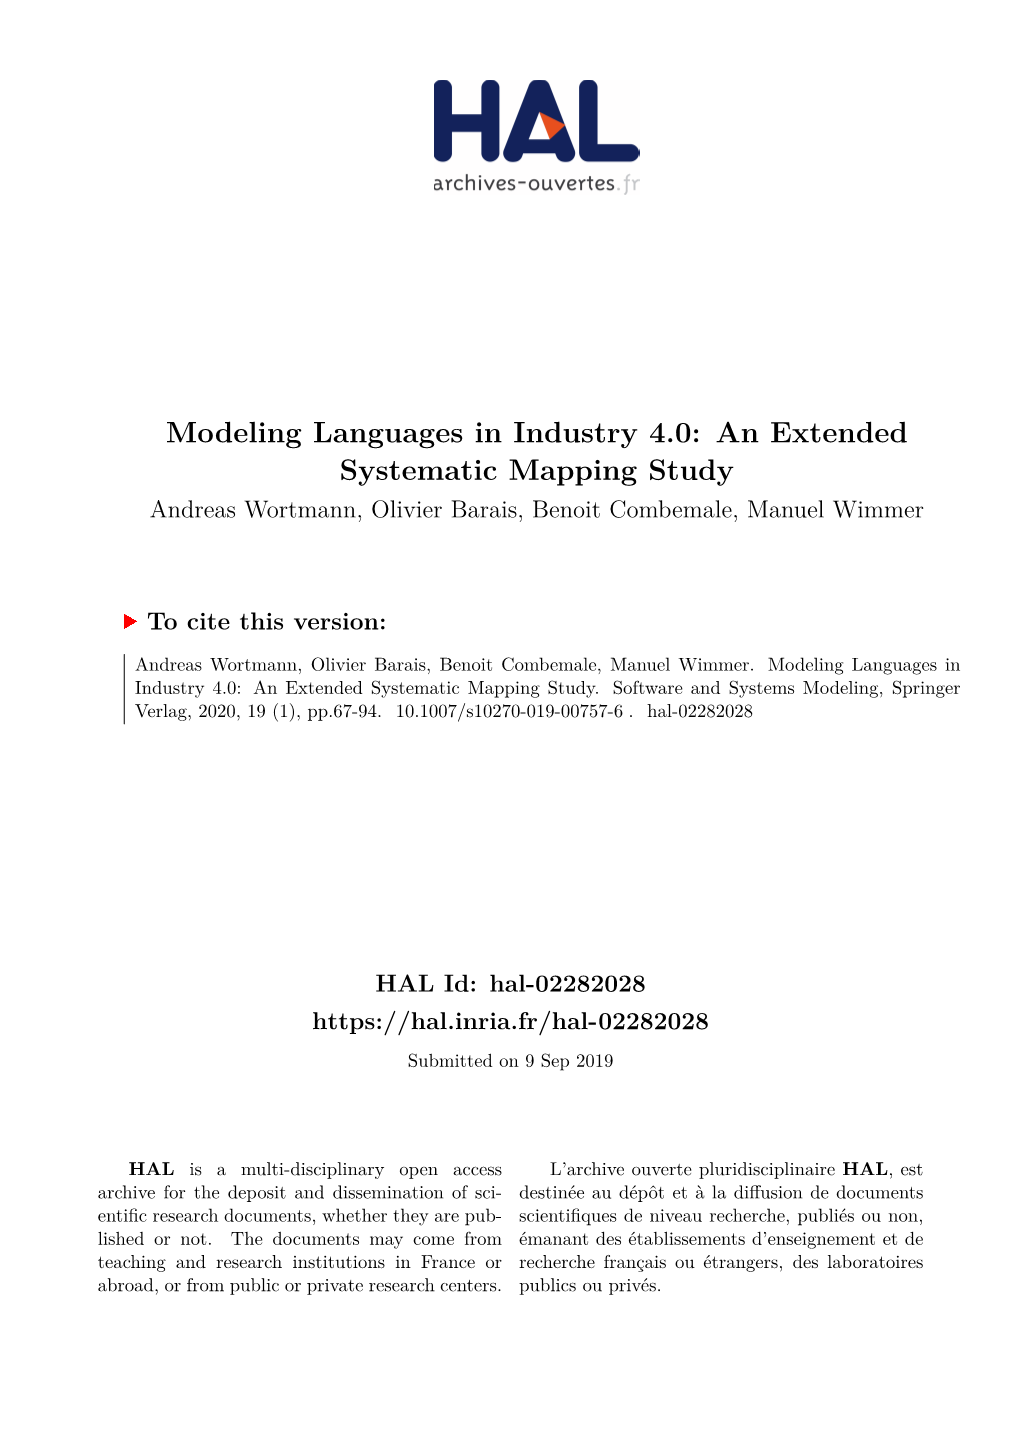 Modeling Languages in Industry 4.0: an Extended Systematic Mapping Study Andreas Wortmann, Olivier Barais, Benoit Combemale, Manuel Wimmer